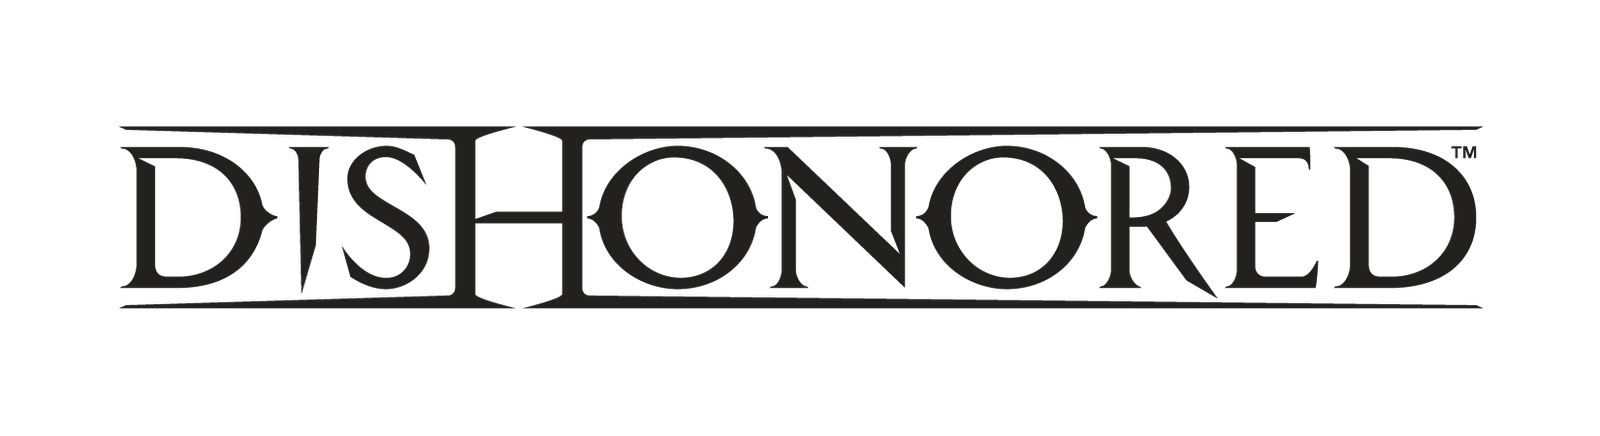 Dishonored Png Hdpng.com 1600 - Dishonored, Transparent background PNG HD thumbnail